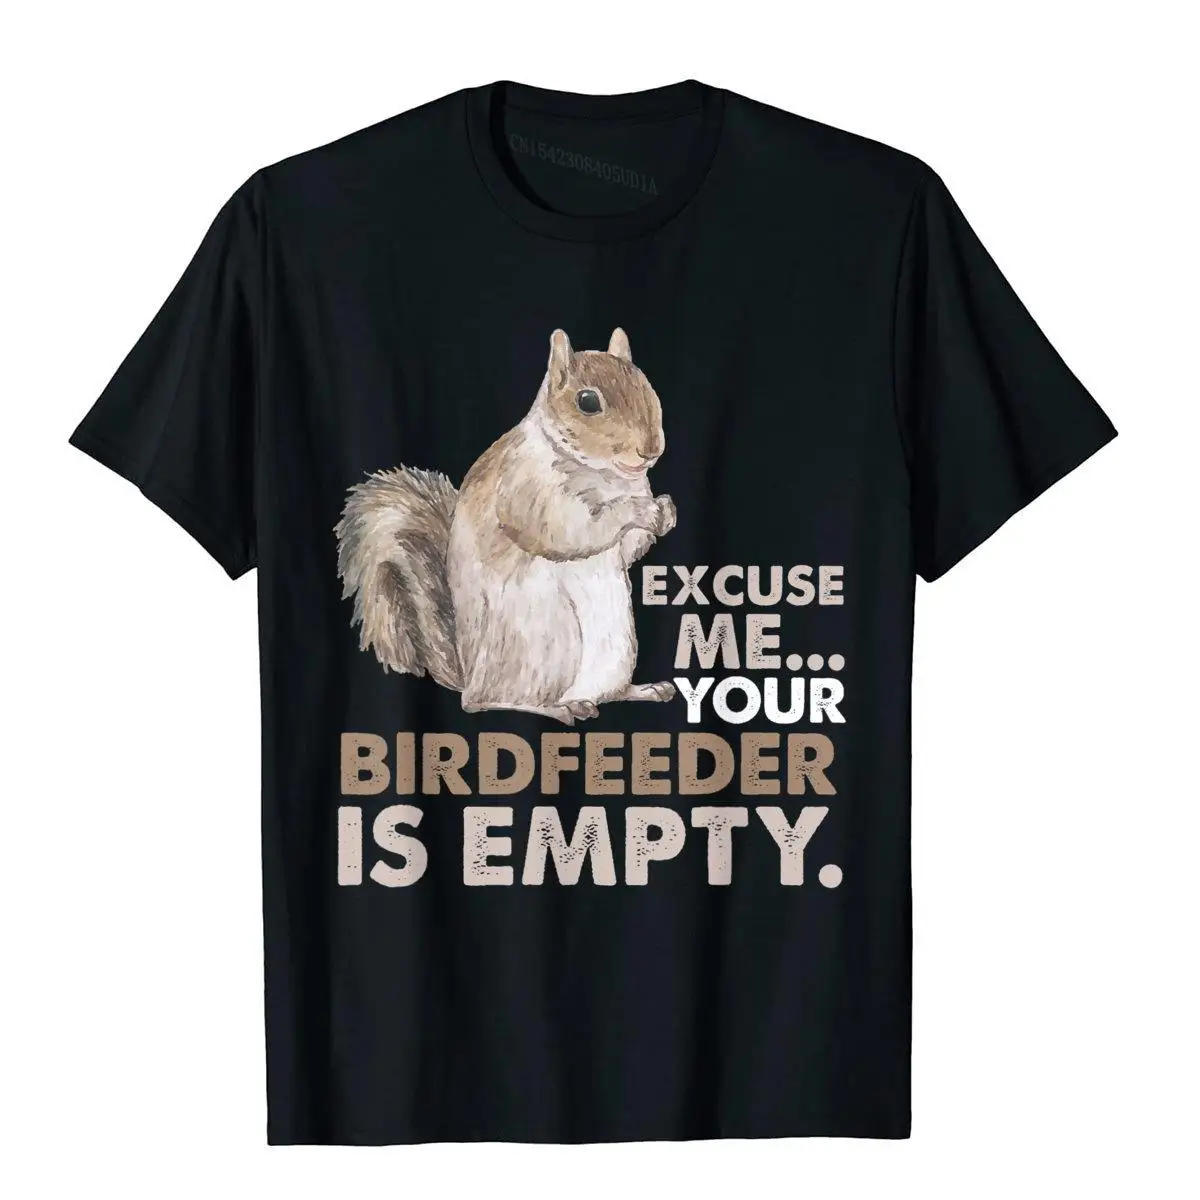 

Squirrel Excuse Me Your Birdfeeder Is Empty T-Shirt Tops Shirt Discount 3D Printed Cotton Men T Shirts Casual